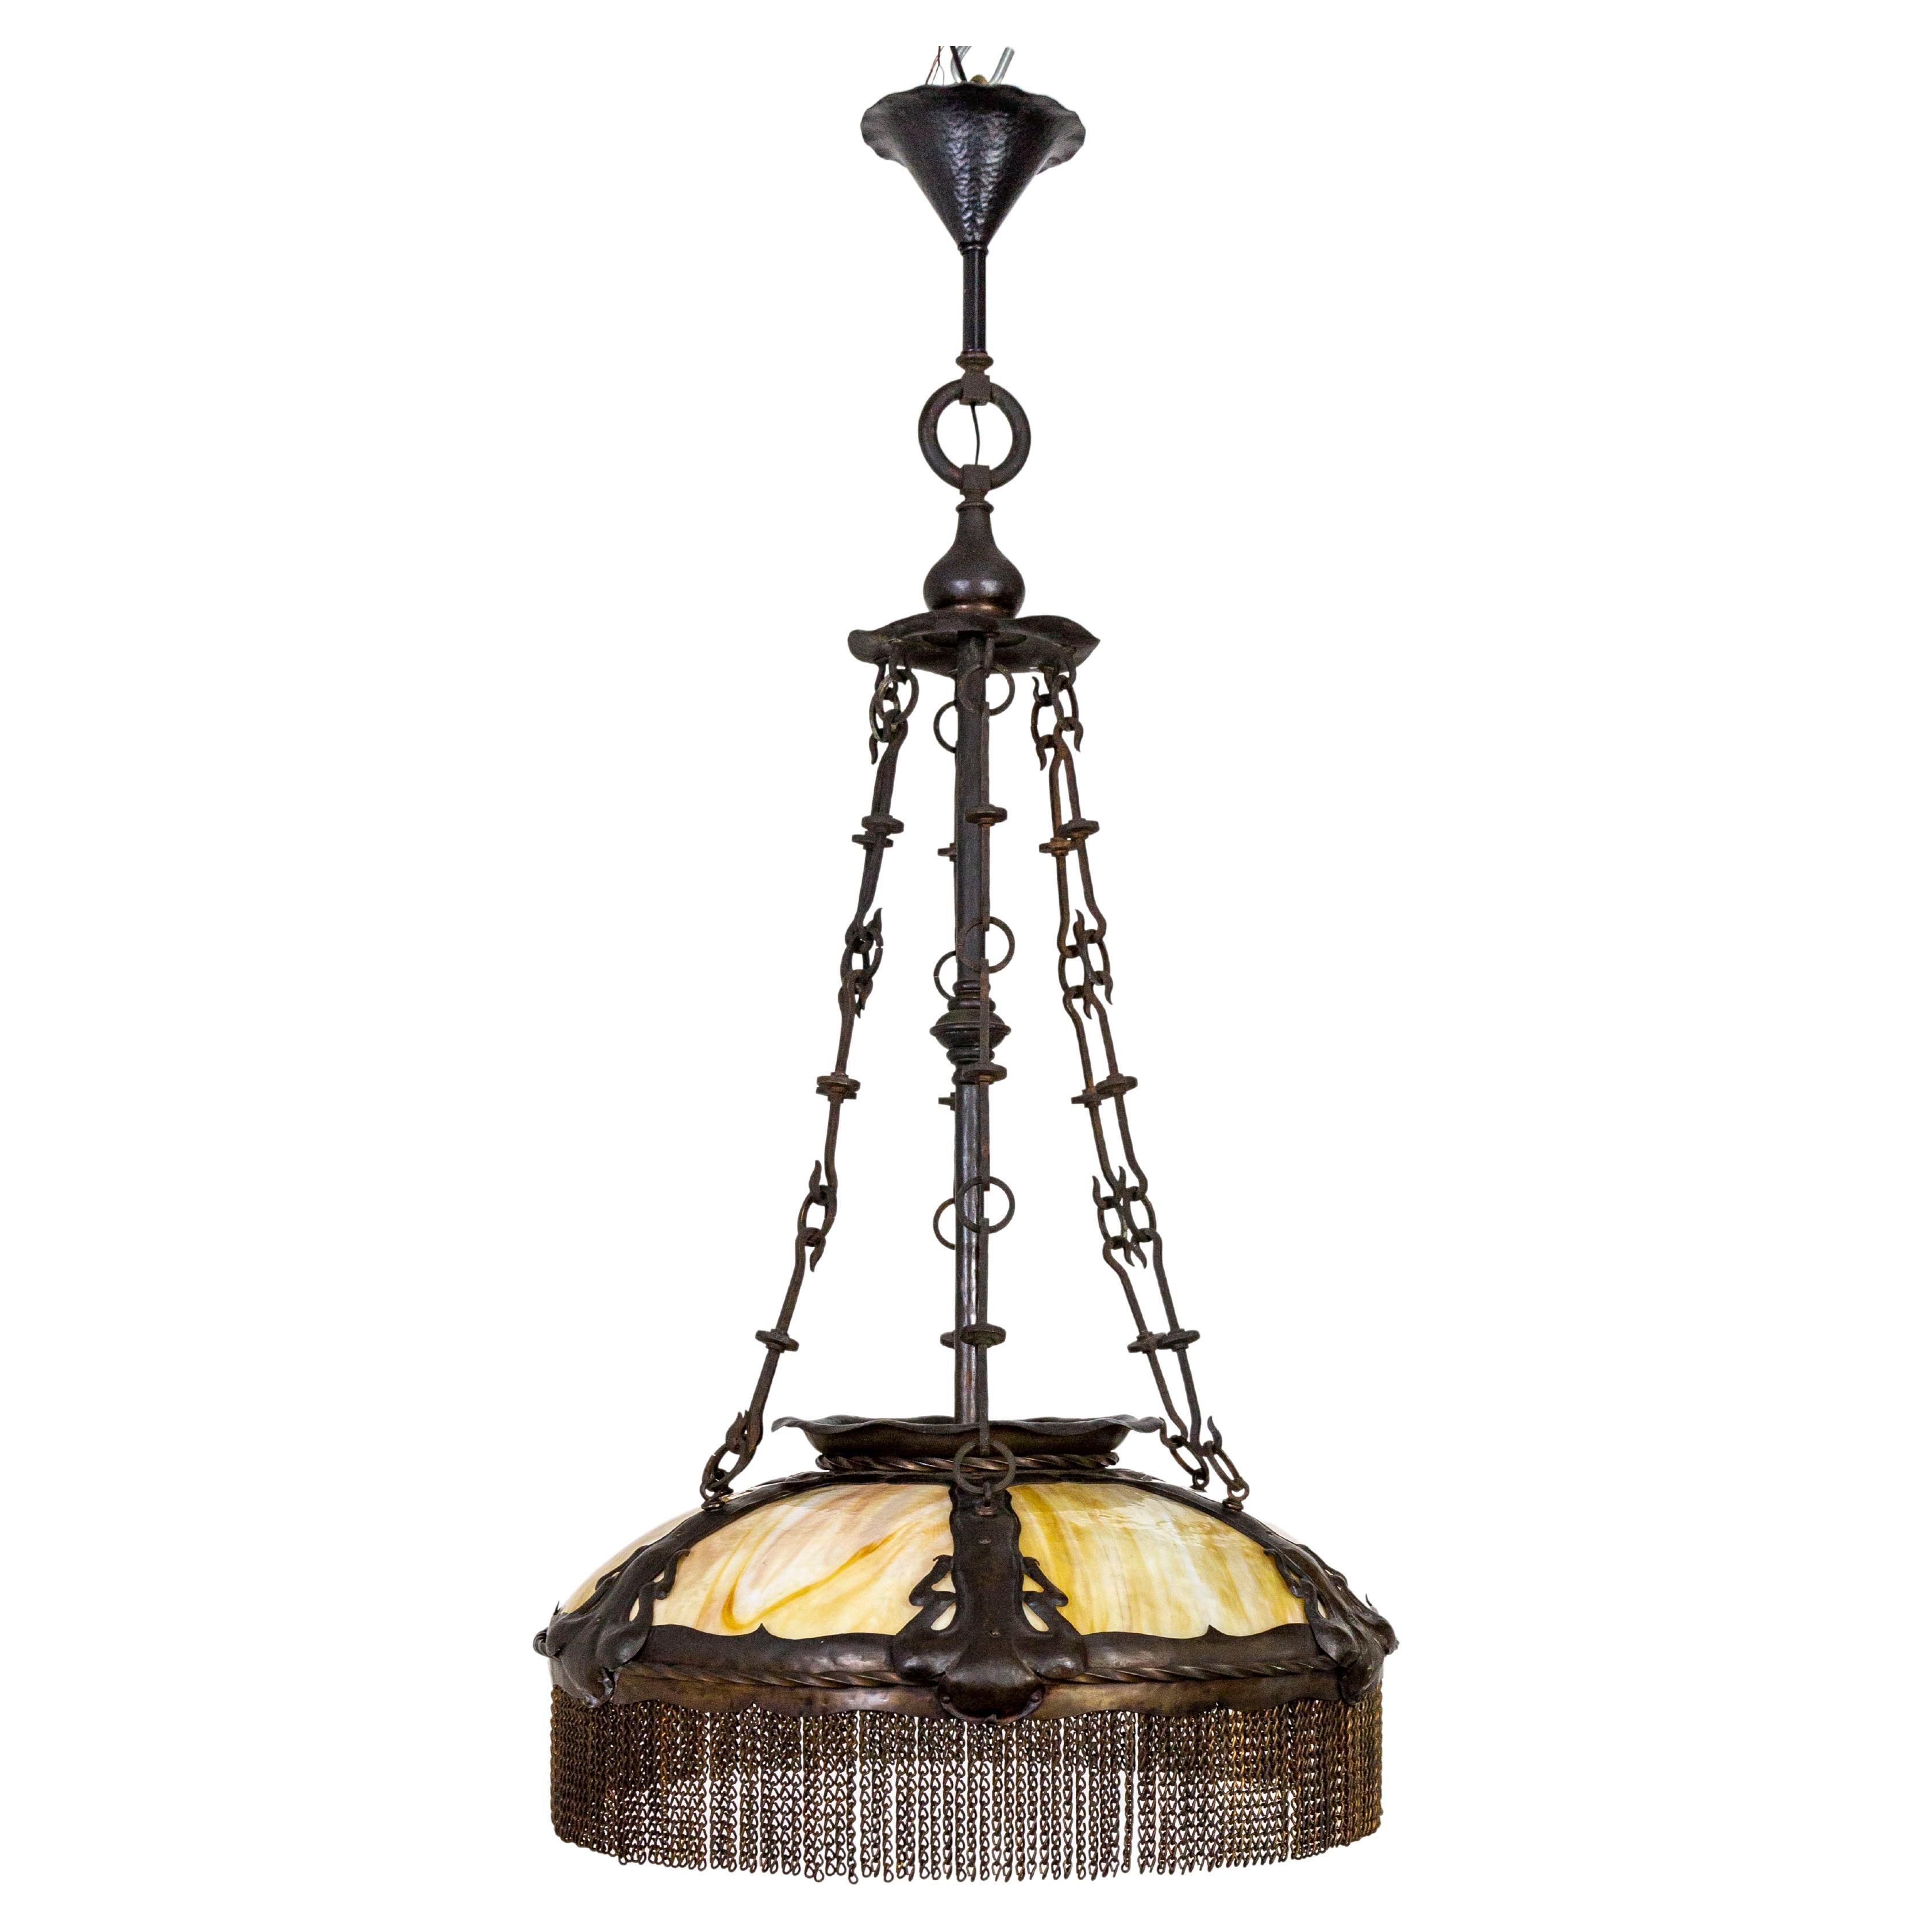 A large scale light fixture, originally gas, made circa 1878, with flowing Art Nouveau styling, hammered details, four hand-wrought, decorative chains and brass banding. Within the bronze and brass structure is parasol shaped, slag glass, in peach,